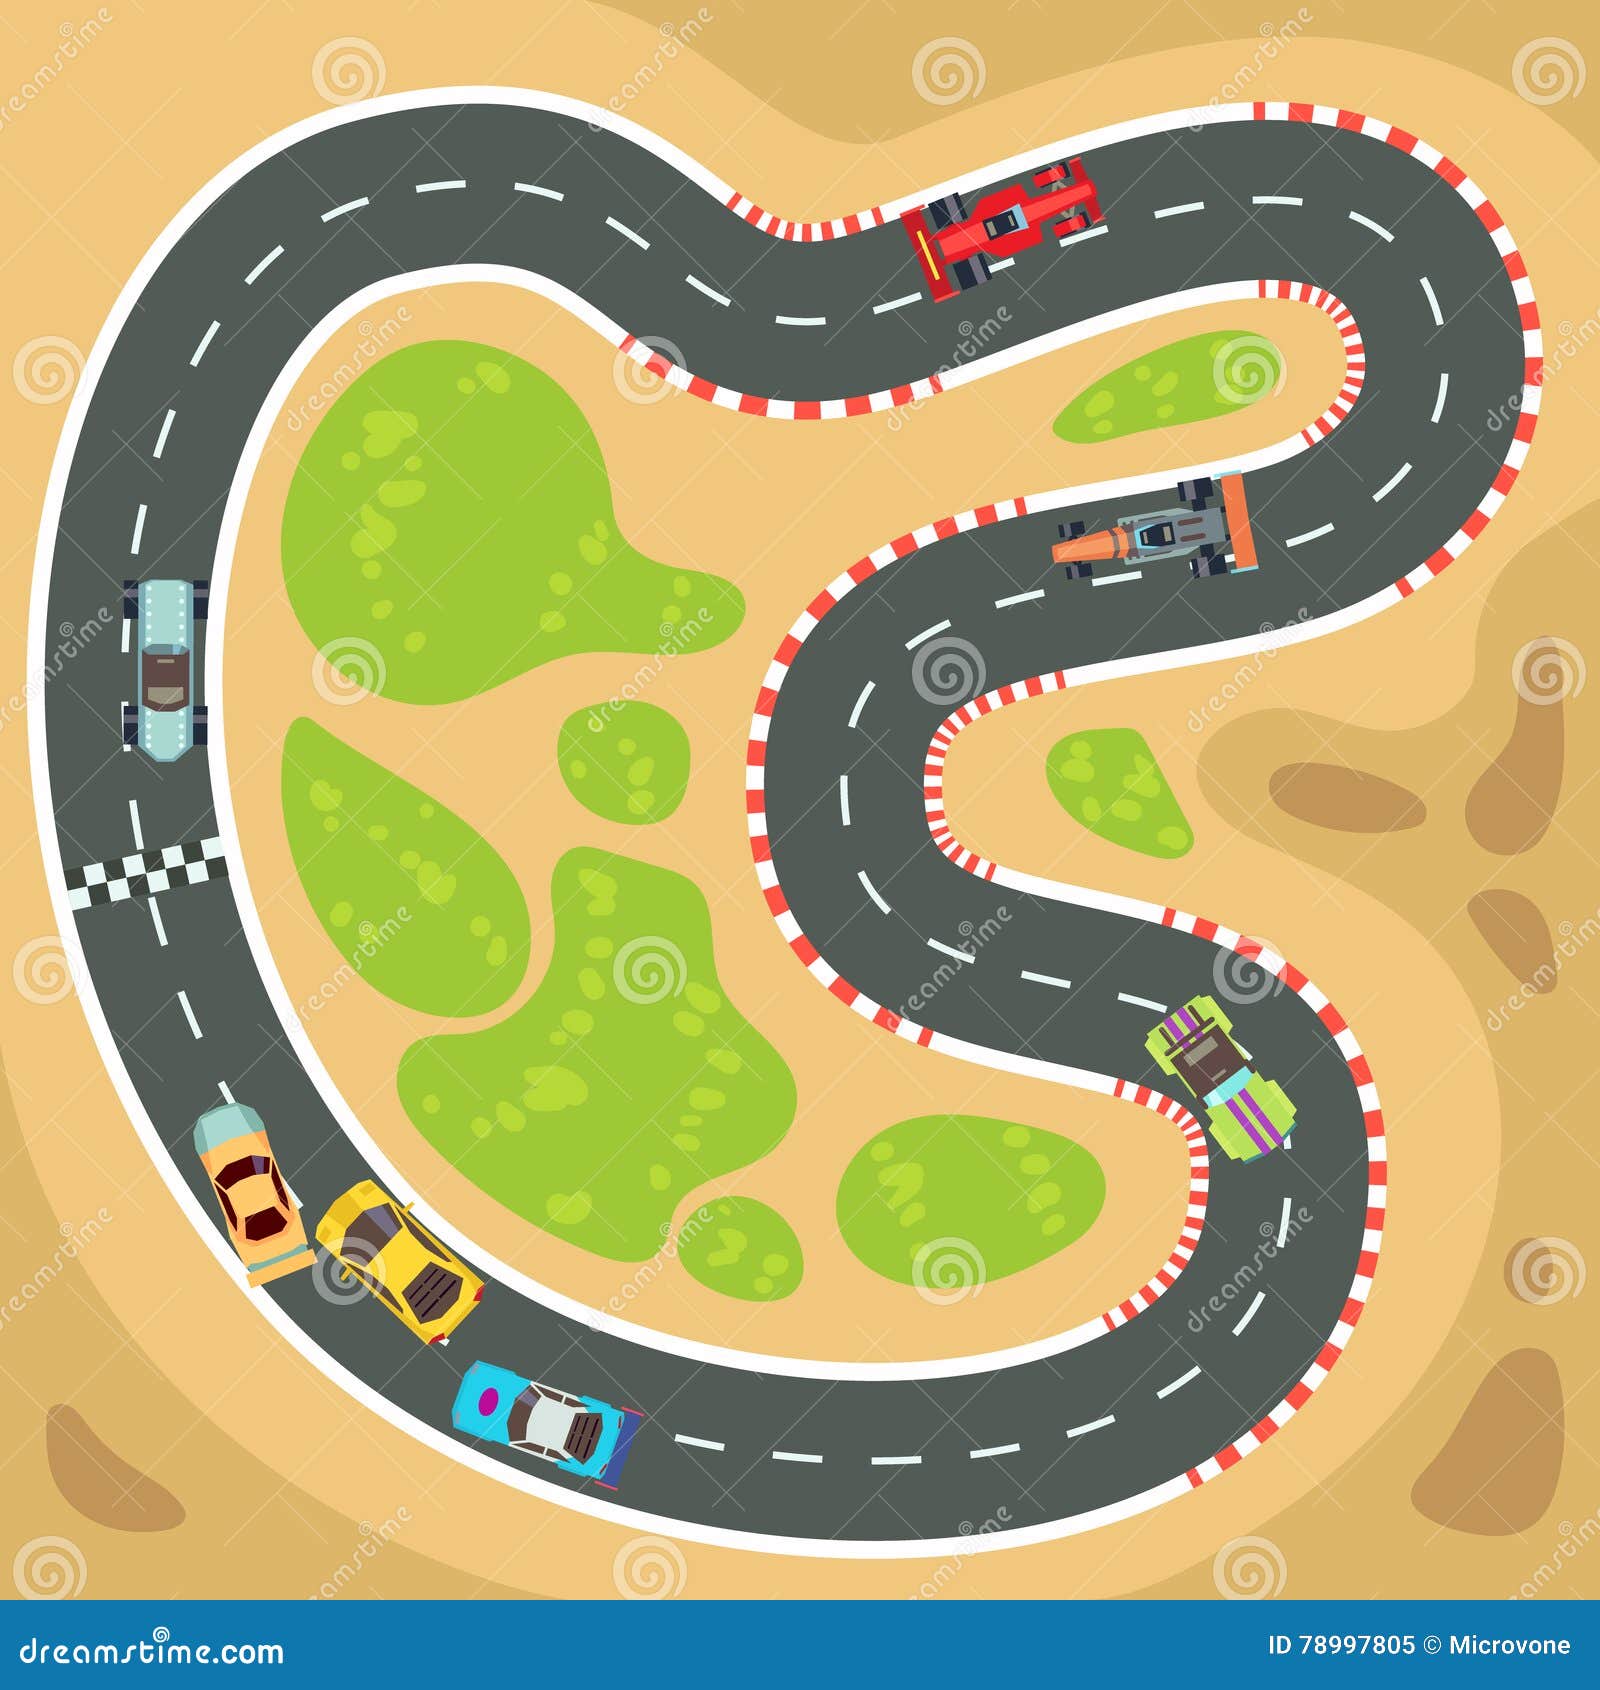 race car track game